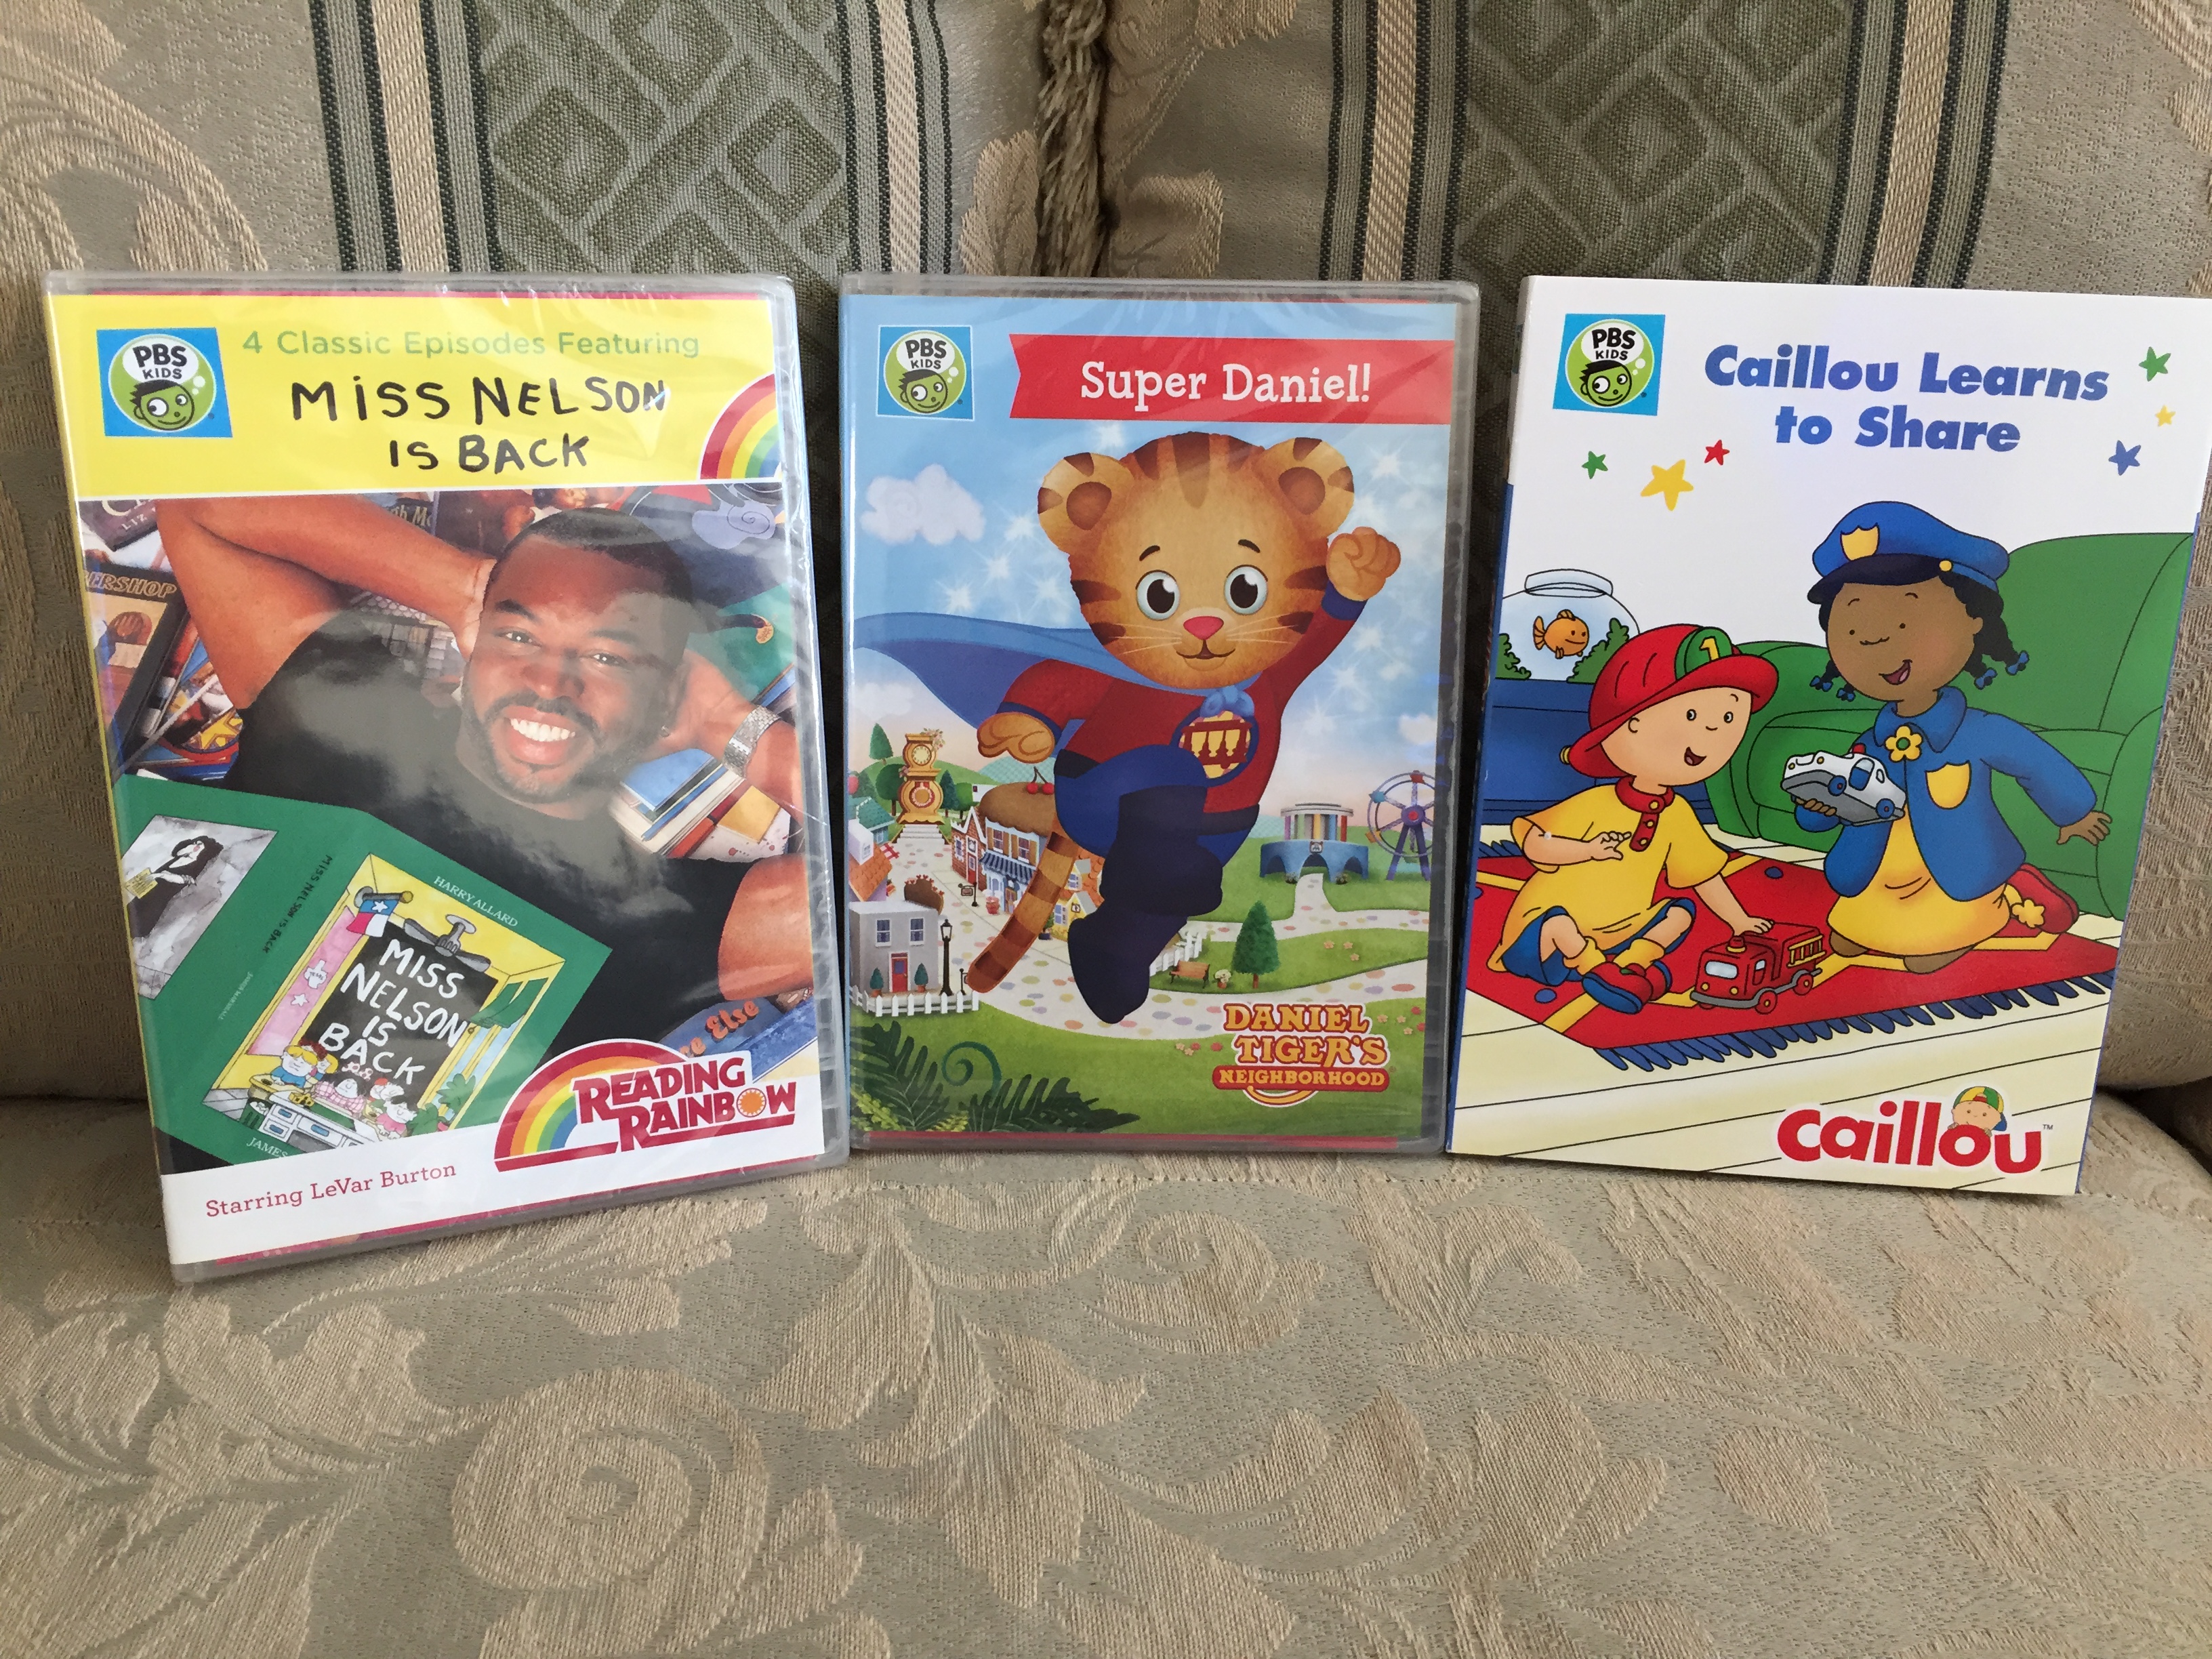 New Dvd Releases From Pbs Super Daniel Caillou Learns To Share